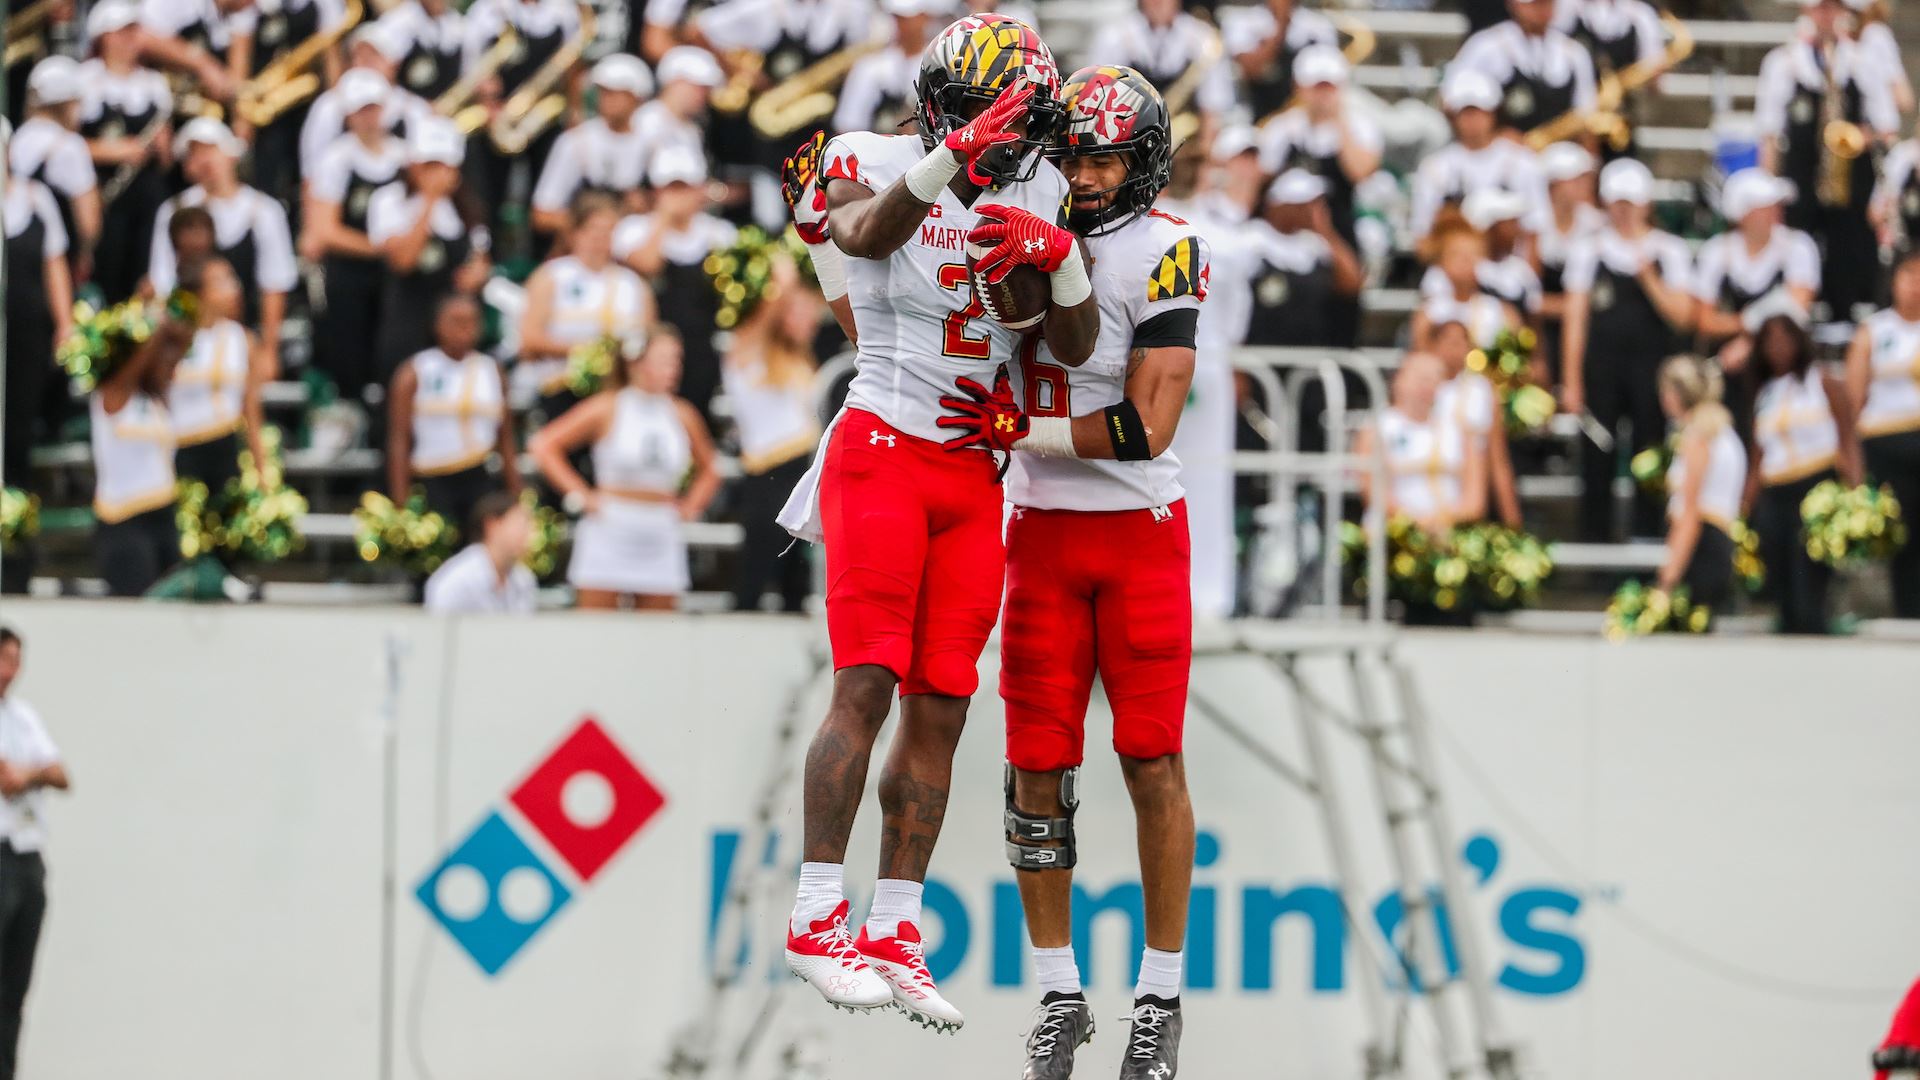 Maryland Crushes Charlotte Behind Tagovailoa's Four TDs